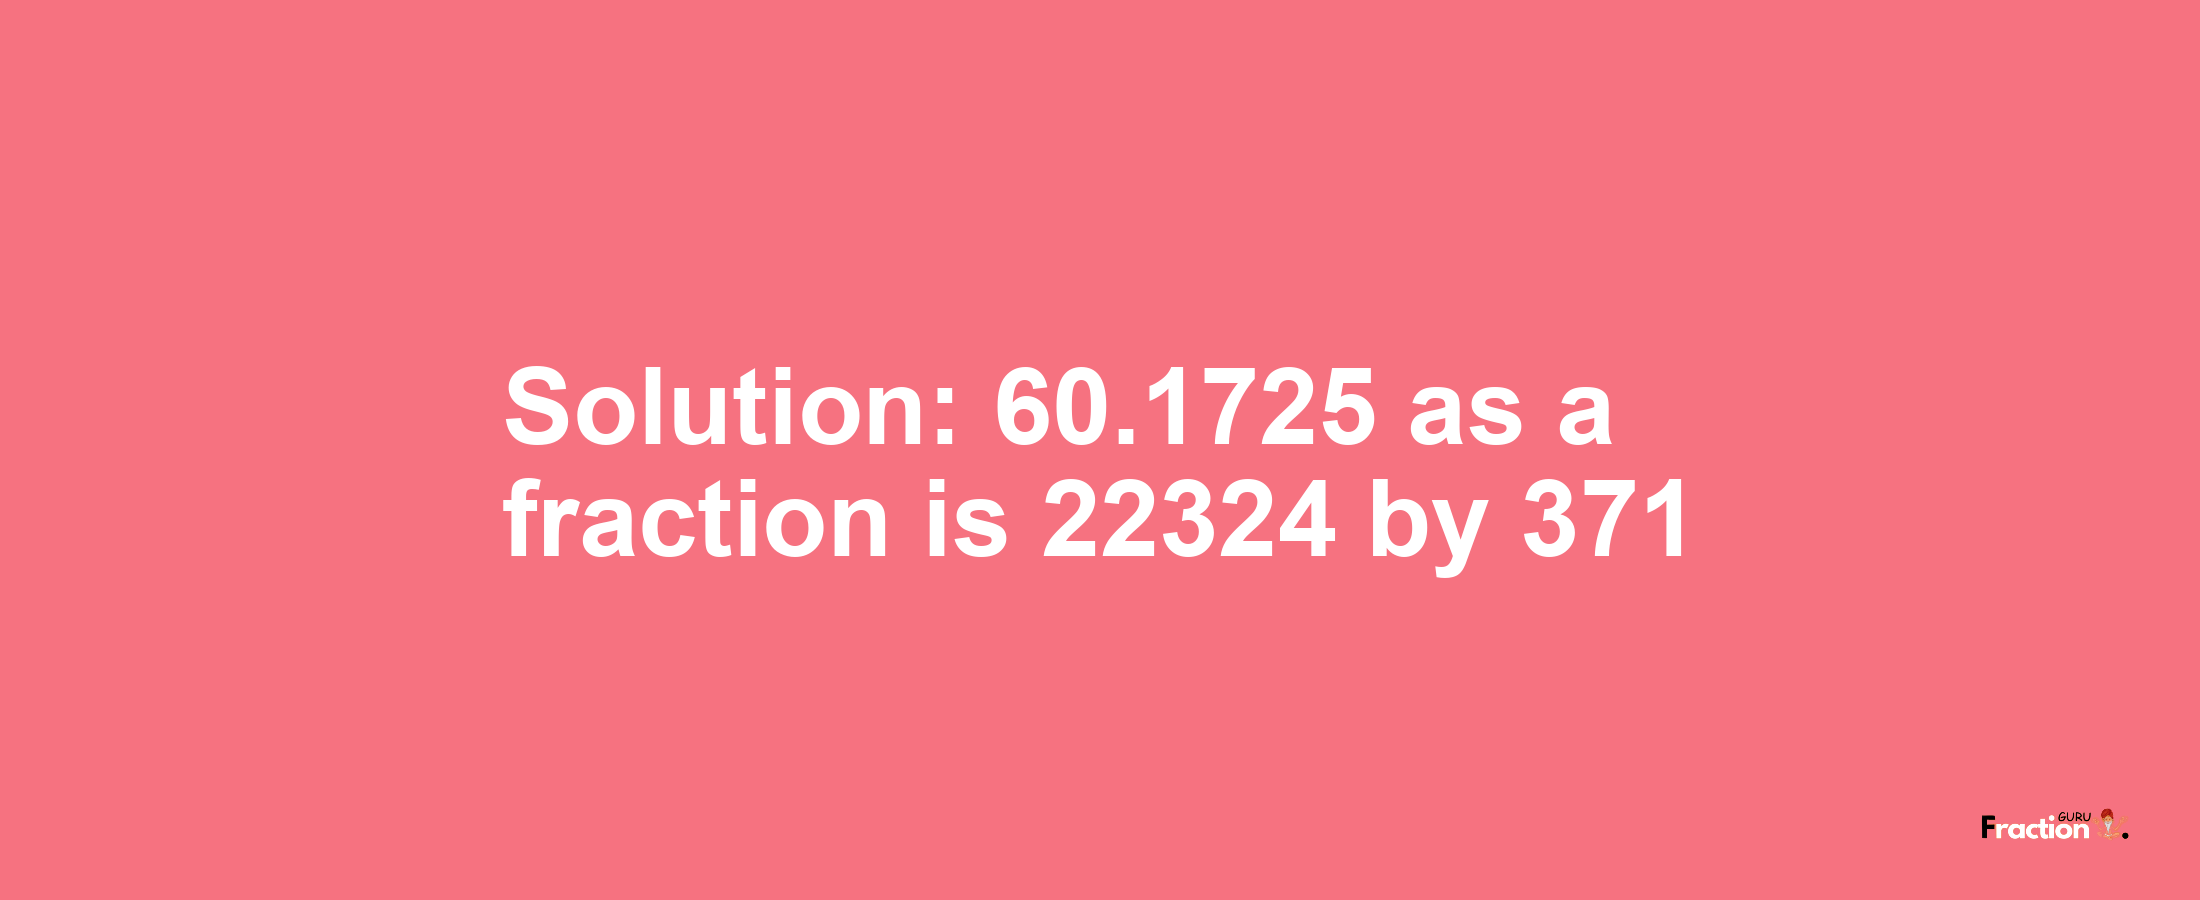 Solution:60.1725 as a fraction is 22324/371